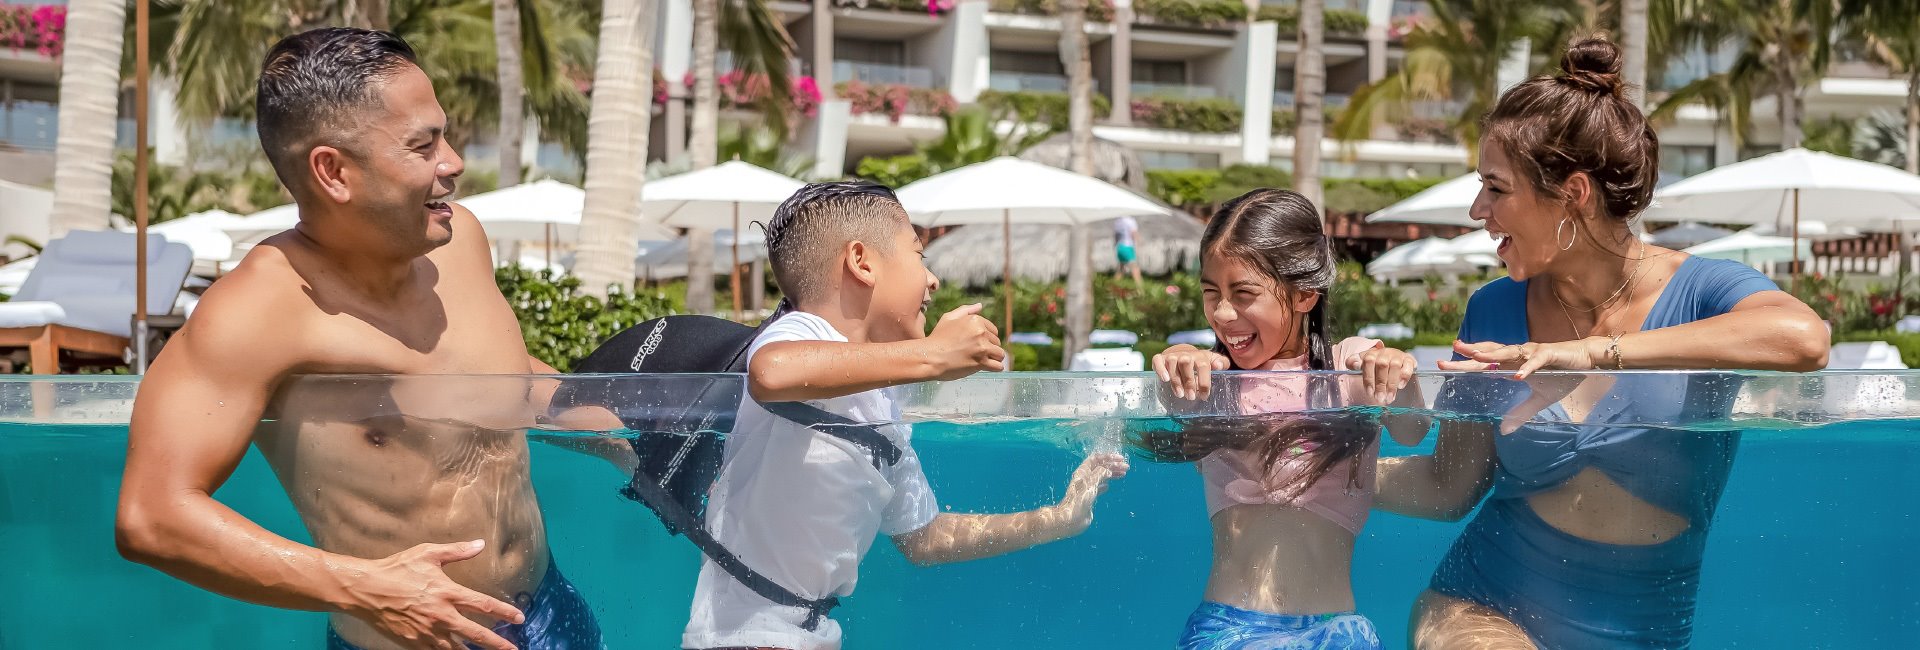 Joyful days offer at Grand Velas Los Cabos, Mexico